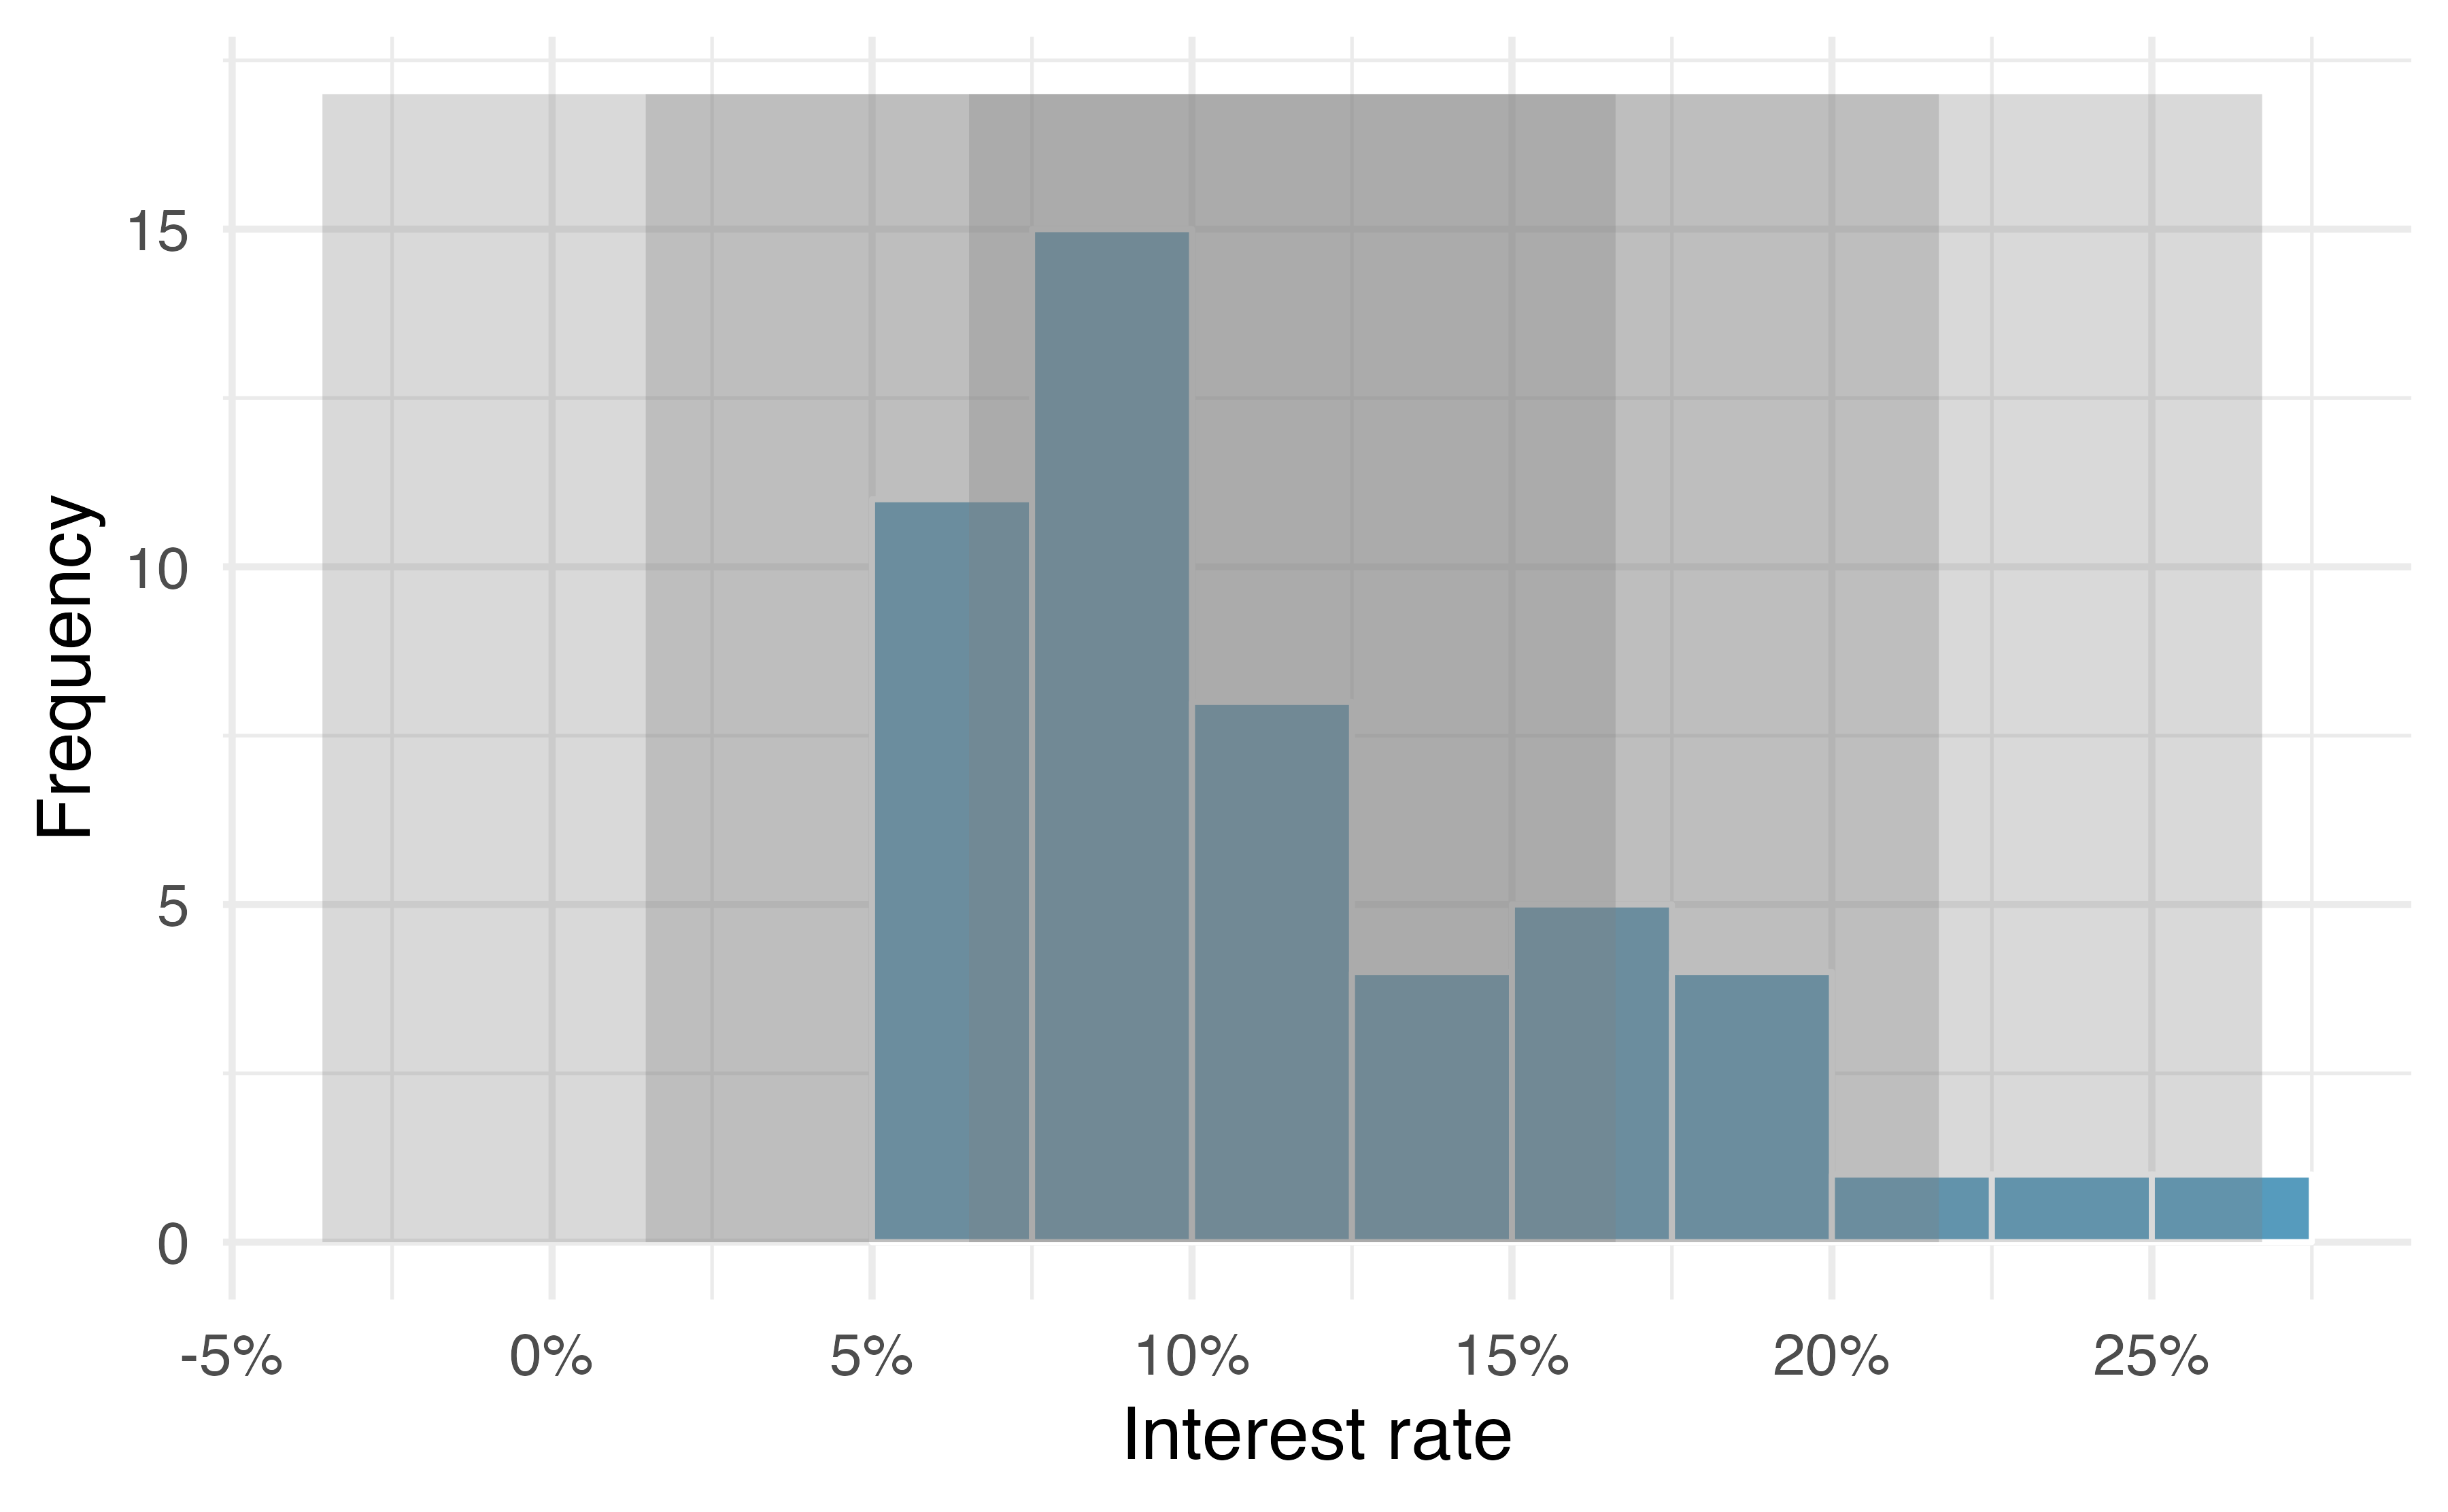 For the `interest_rate` variable, 34 of the 50 loans (68%) had interest rates within 1 standard deviation of the mean, and 48 of the 50 loans (96%) had rates within 2 standard deviations. Usually about 70% of the data are within 1 standard deviation of the mean and 95% within 2 standard deviations, though this is far from a hard rule.